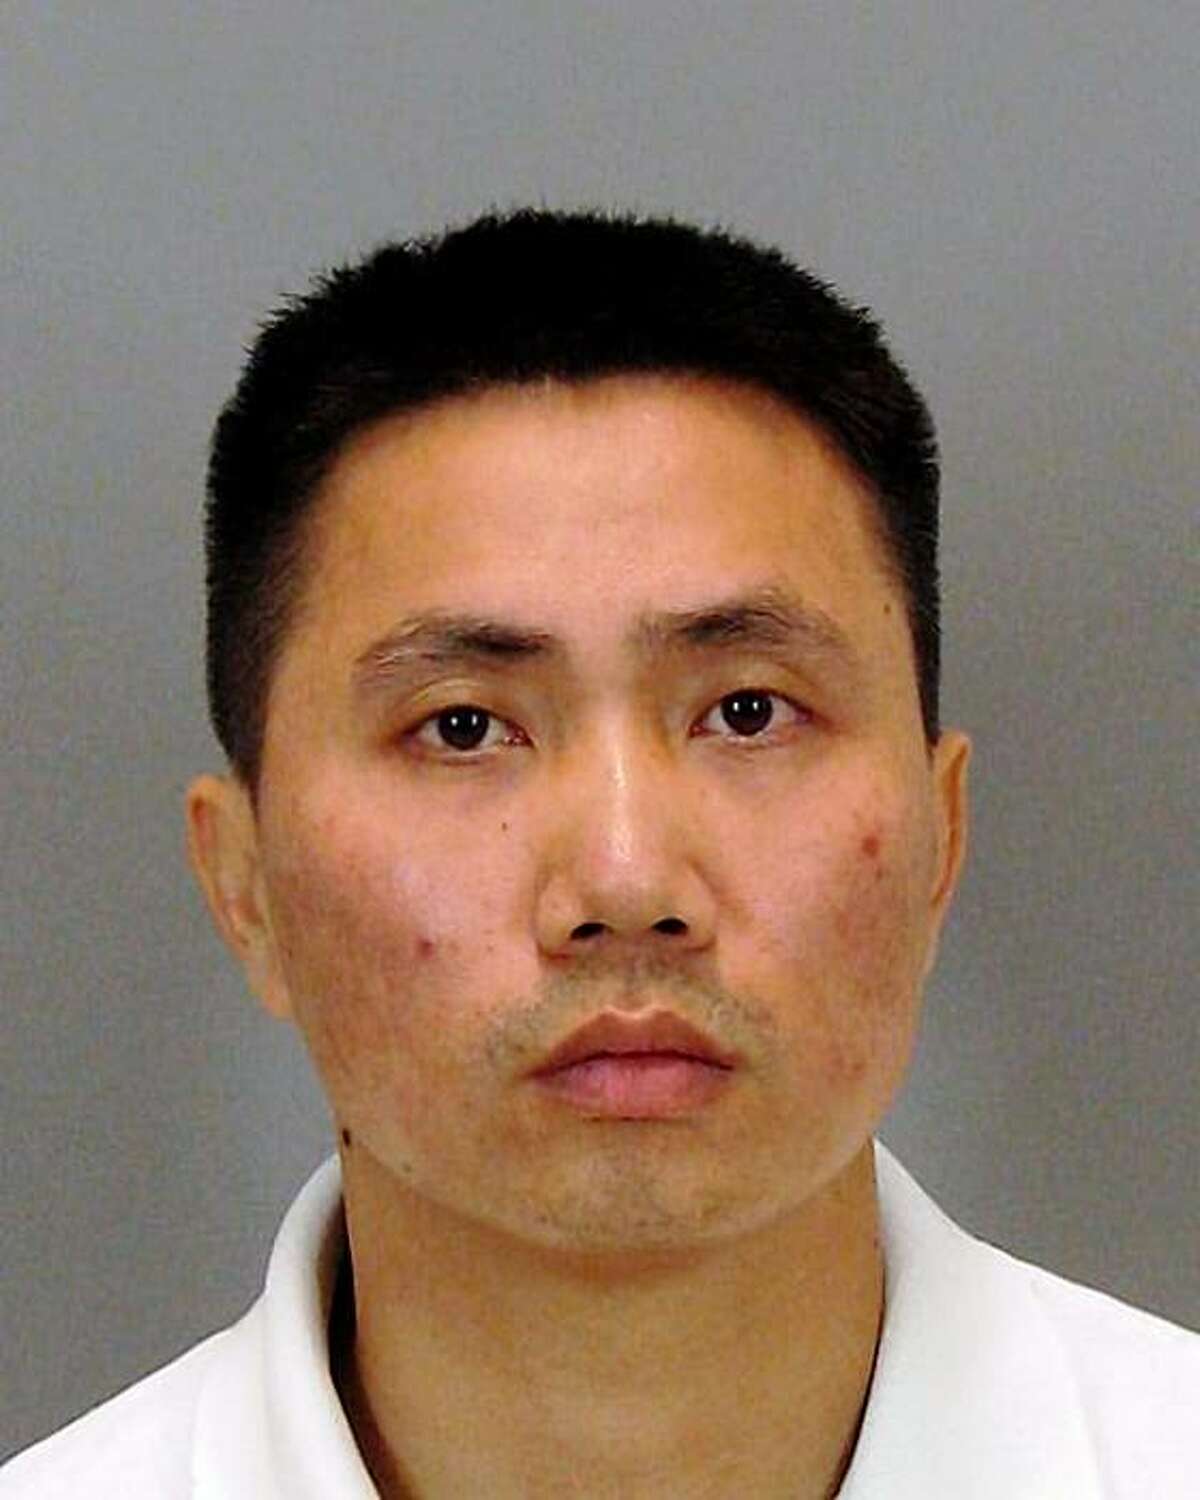 Quang Duc Phan, 32, of San Jose was arrested on suspicion of murder in the slaying of Nam Hoang Ma. Mai was shot and killed on the 300 block of North Capitol Road near McKee Road at 12:35 a.m. July 9.